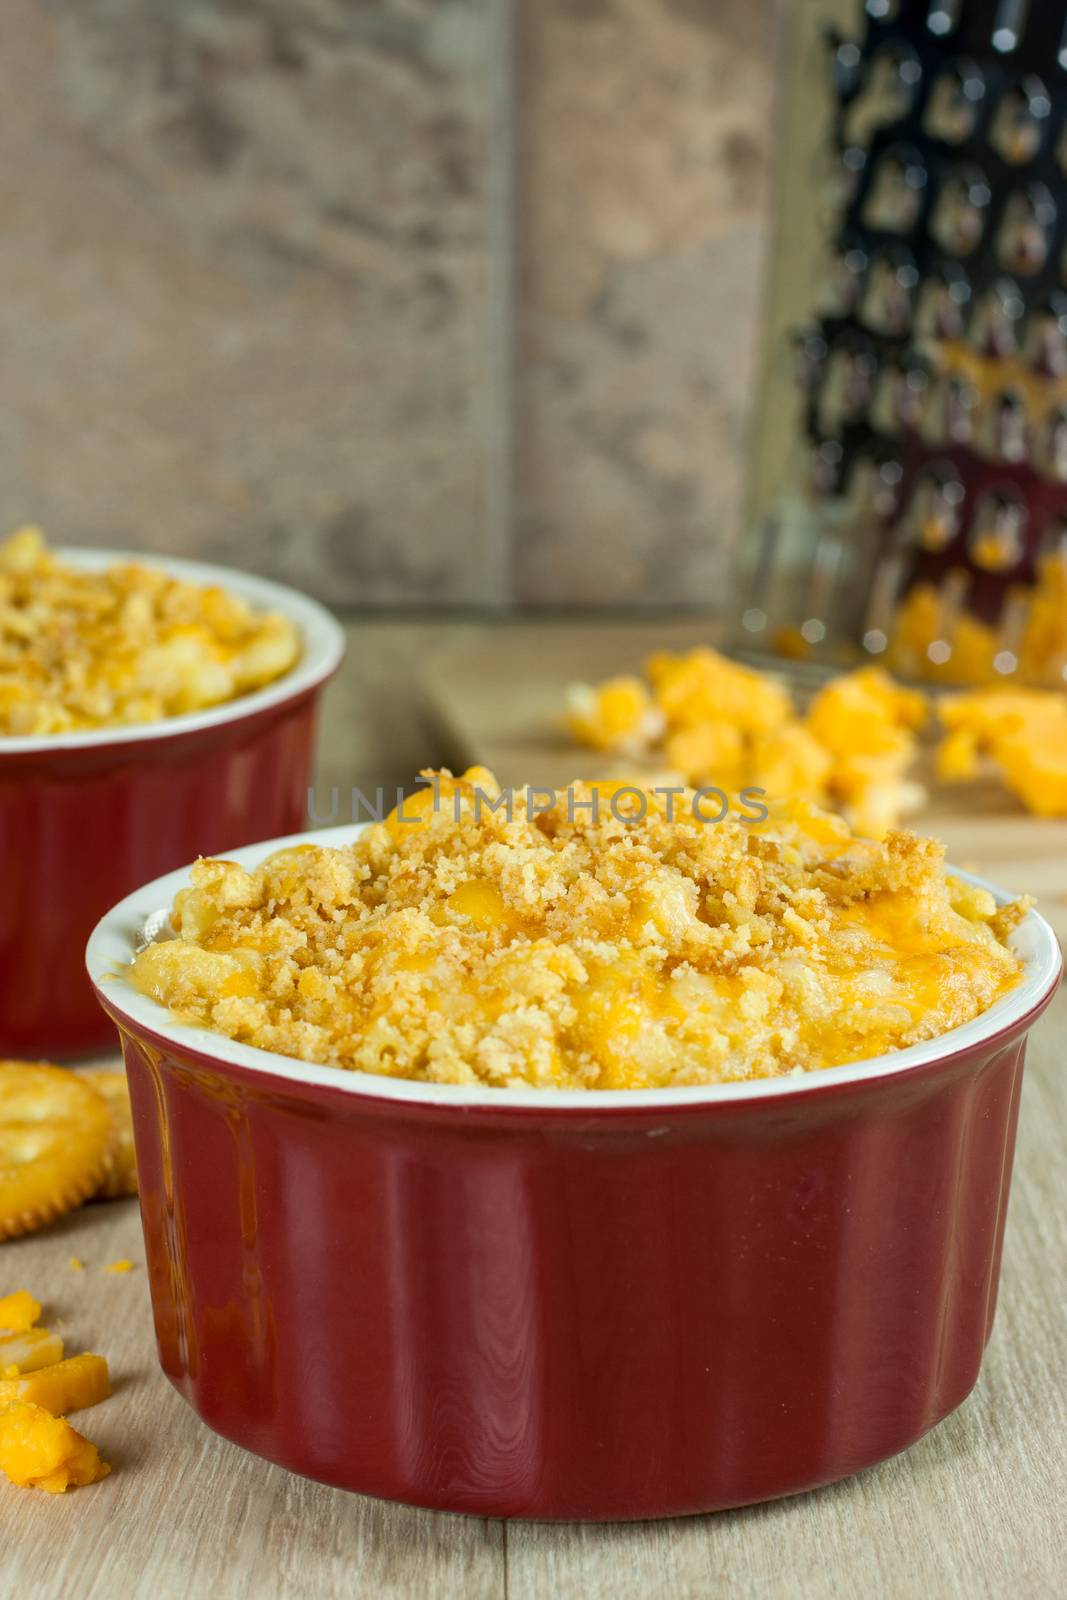 Baked Macaroni and Cheese by SouthernLightStudios